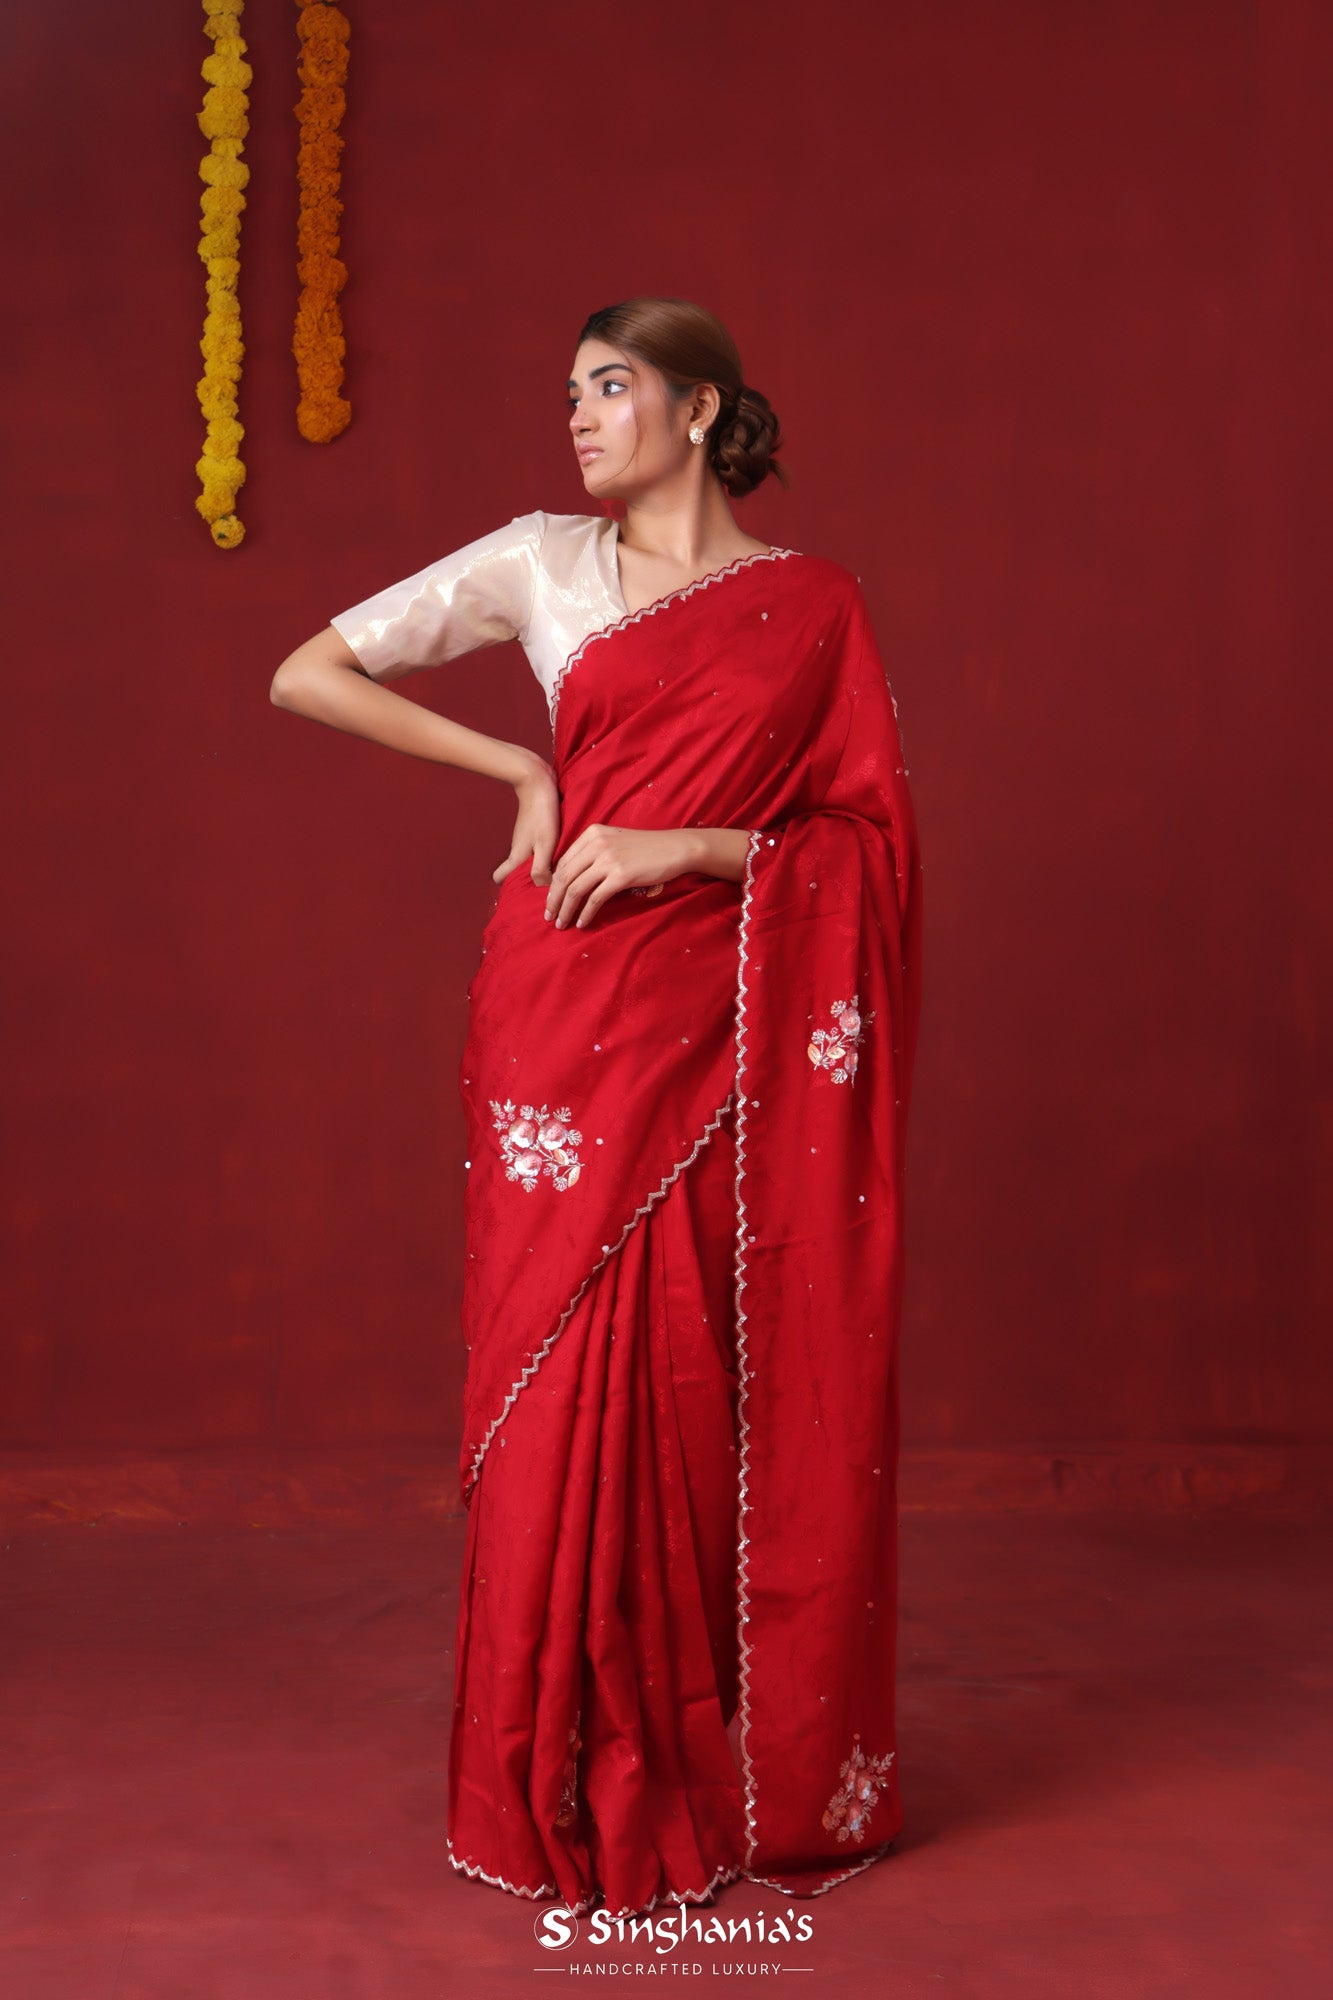 Crimson Red Modal Satin Saree With Hand Embroidery